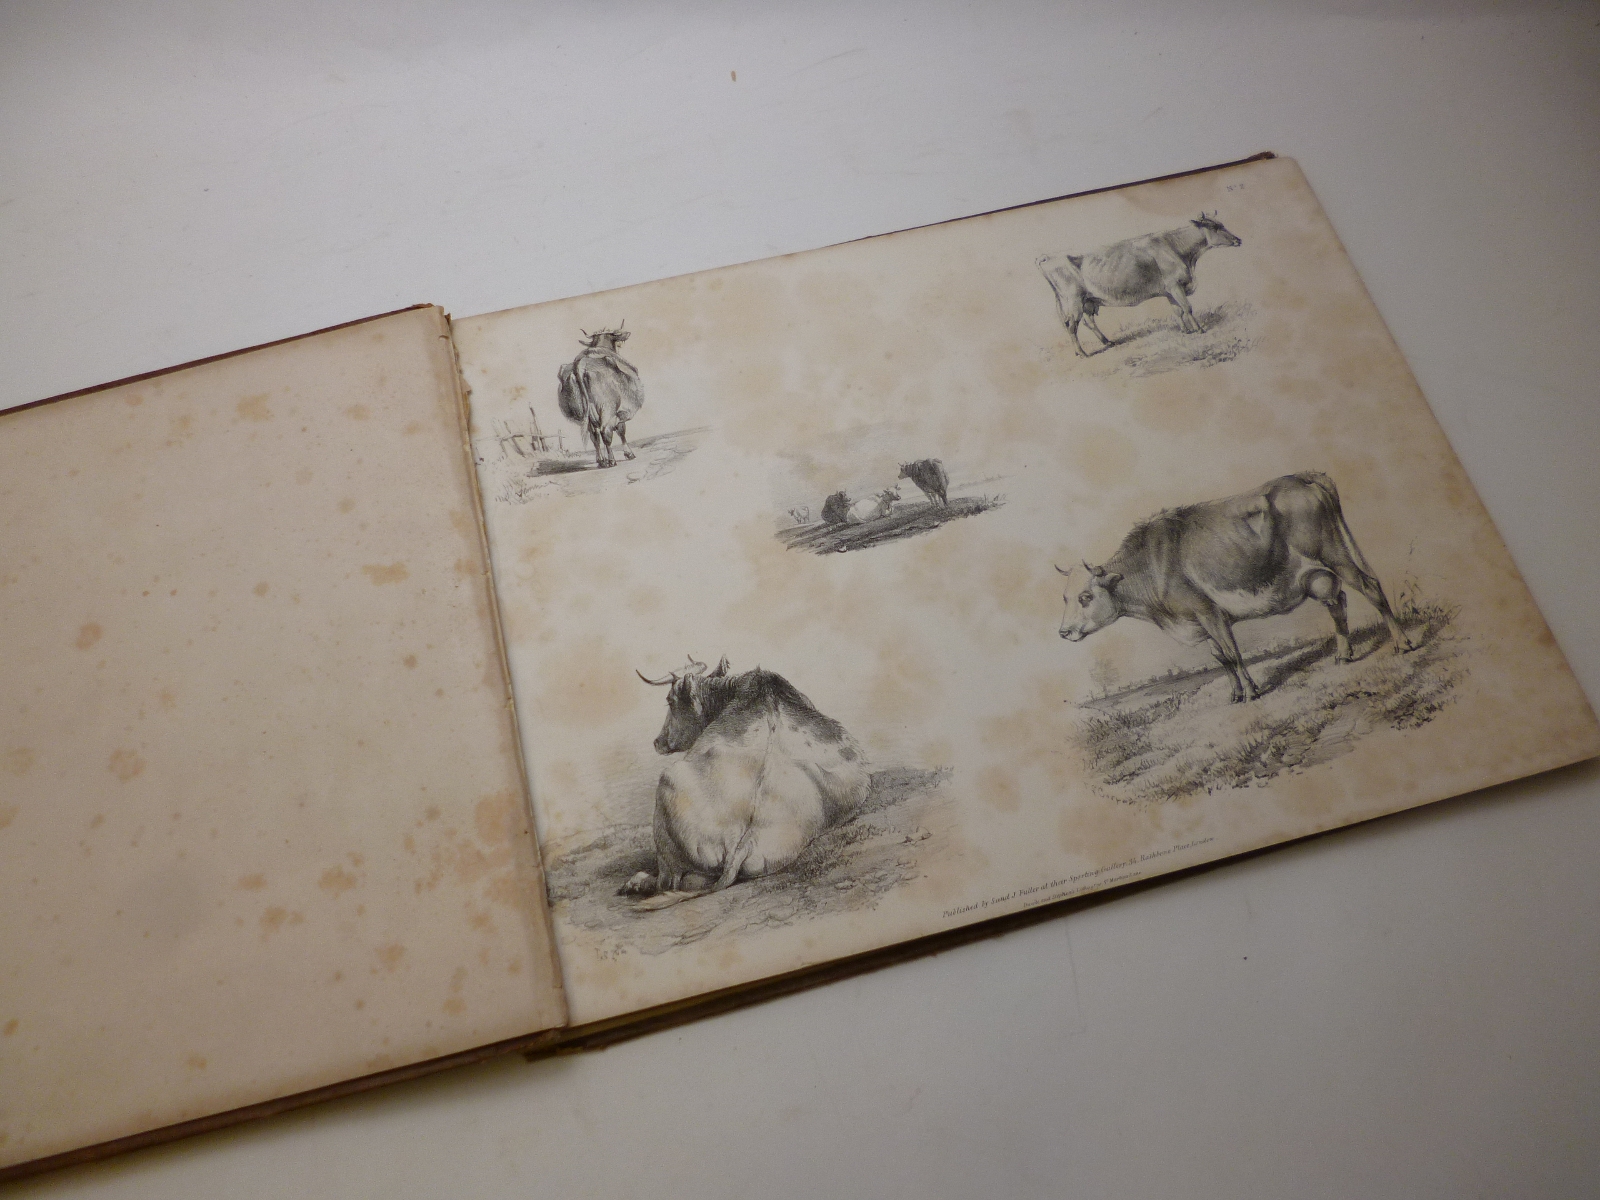 THOMAS SIDNEY COOPER: STUDIES OF CATTLE, L, S & J Fuller, circa 1840, 32 plts, old bds both